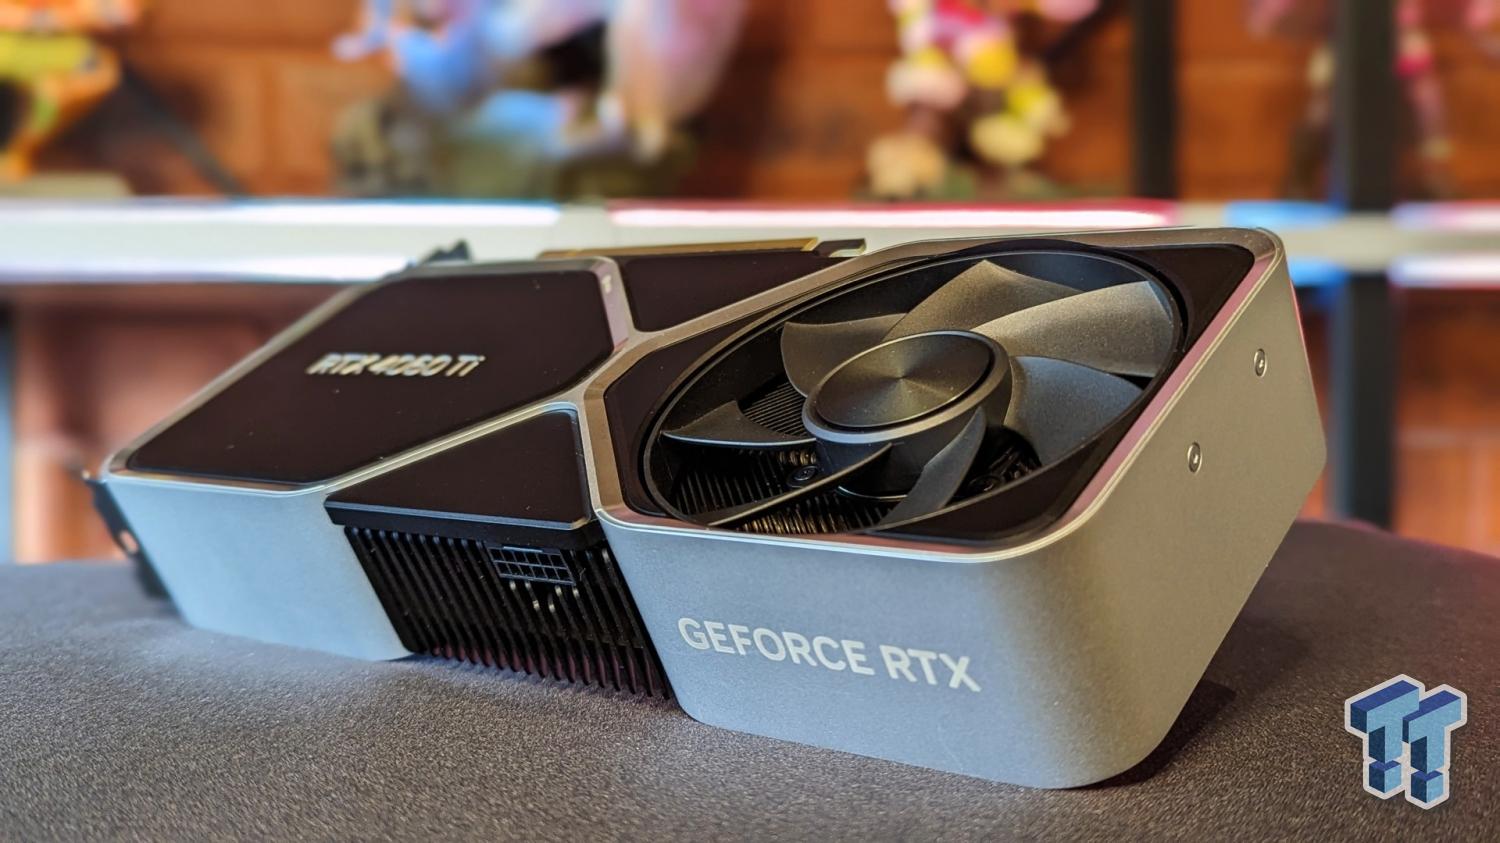 Nvidia GeForce RTX 3080 review: welcome to the next level